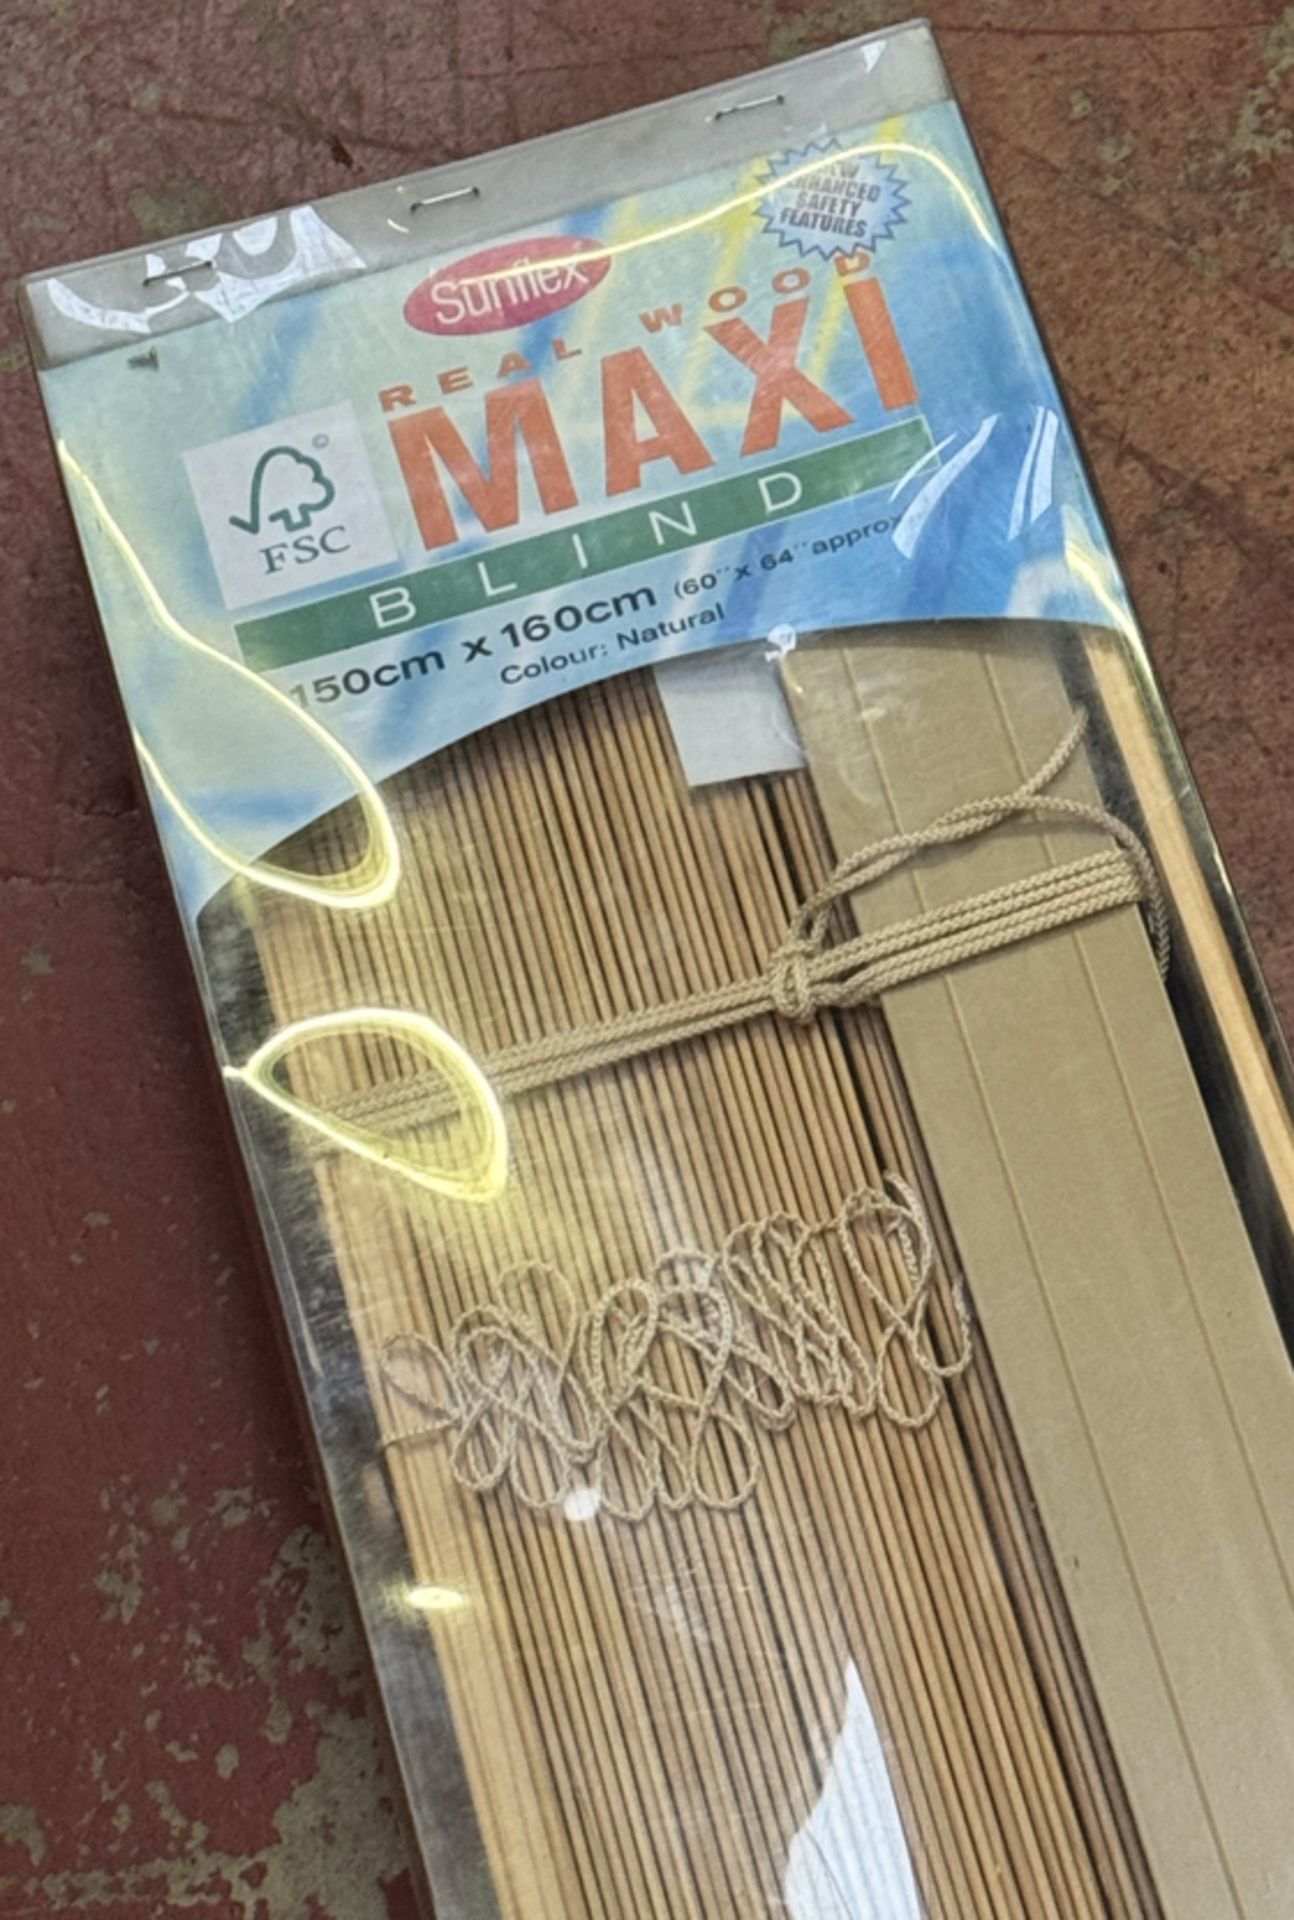 Sunflex Real Woood Maxi Blind 150 x 160cm - BRAND NEW & BOXED